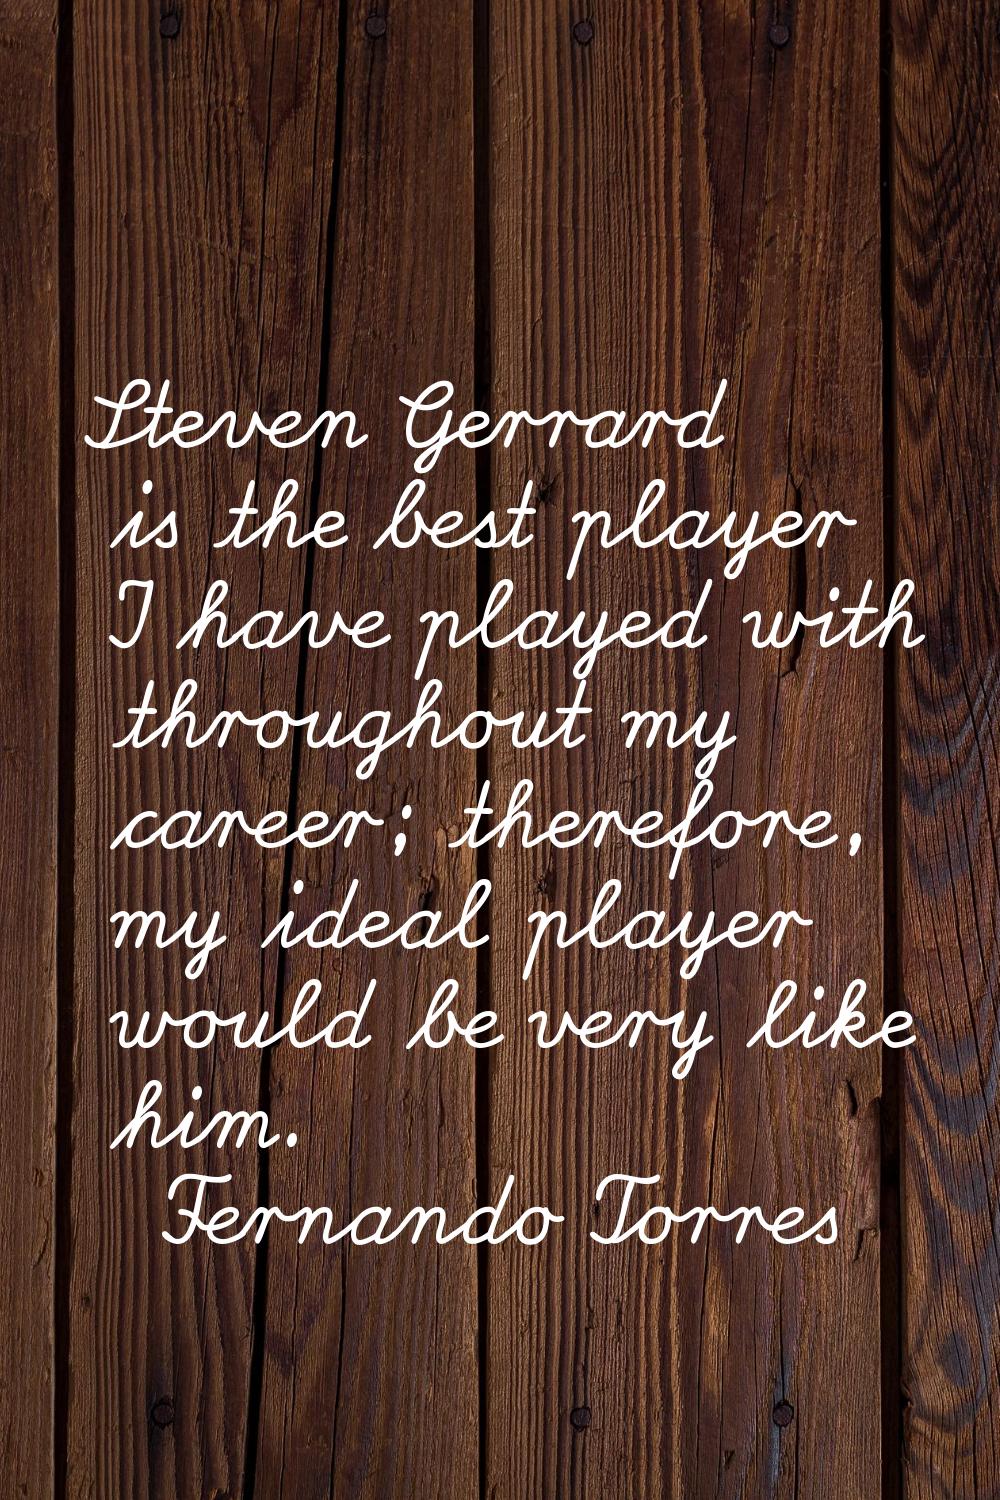 Steven Gerrard is the best player I have played with throughout my career; therefore, my ideal play